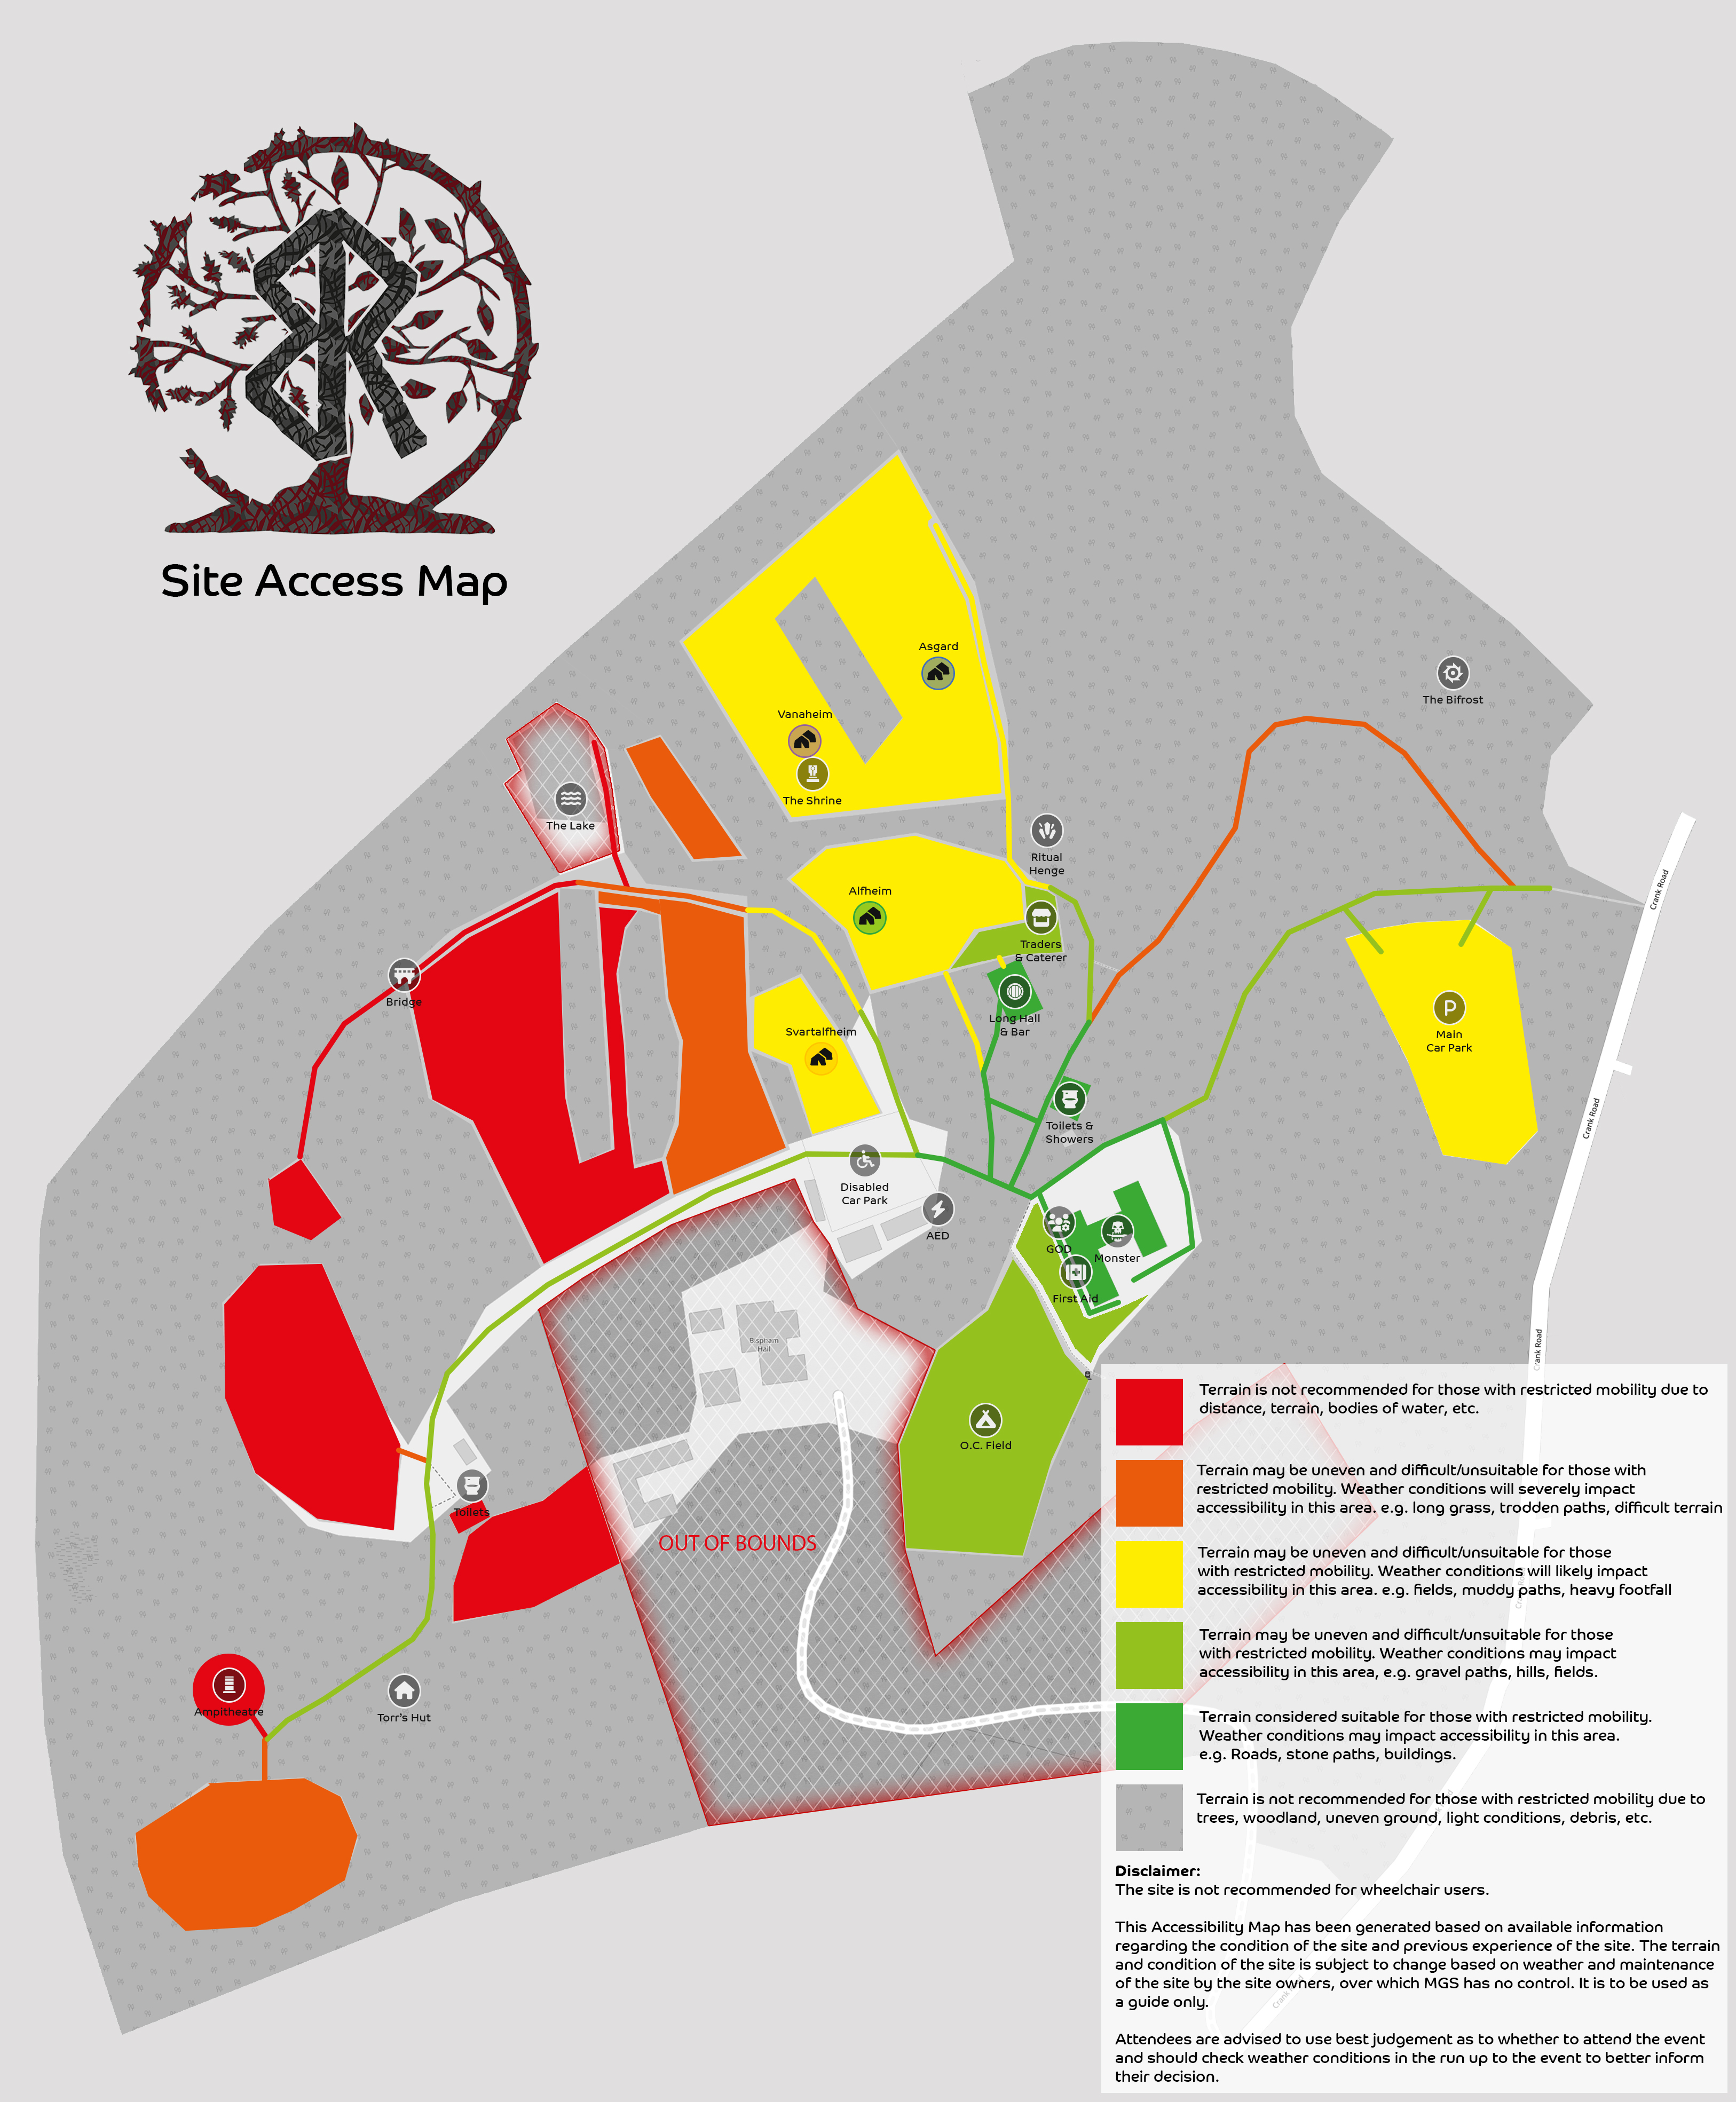 Site Access Map